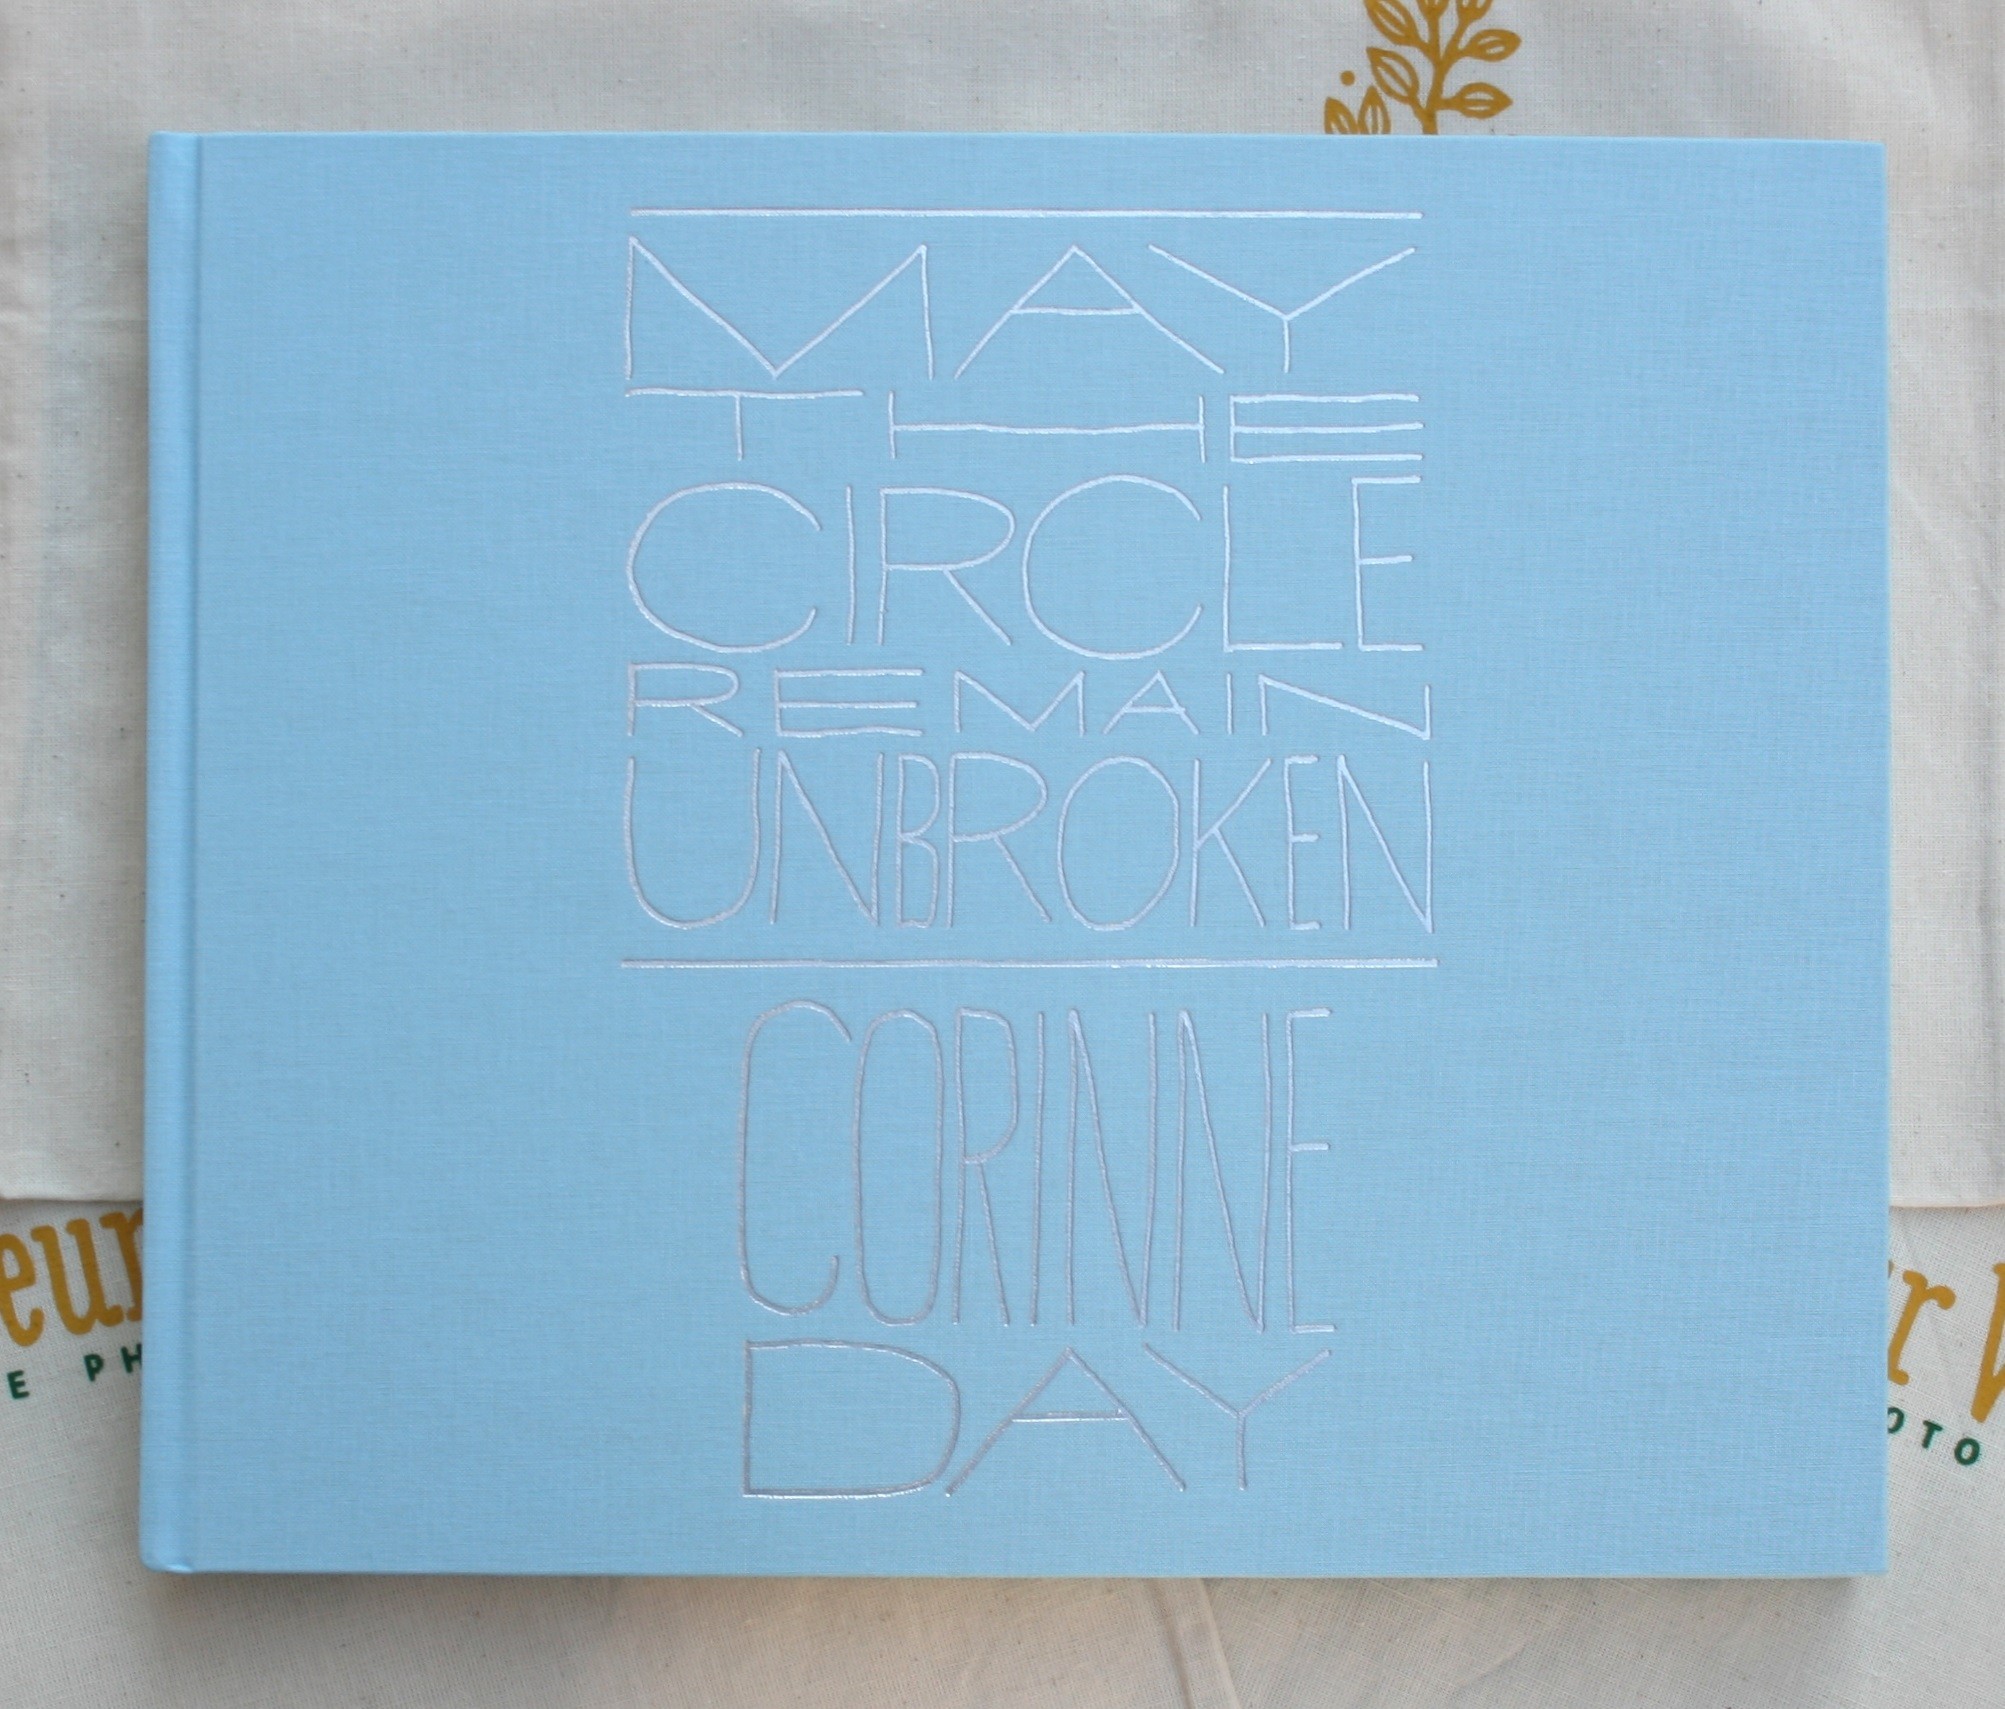 May the Circle Remain Unbroken by Corinne Day, at Morel Books